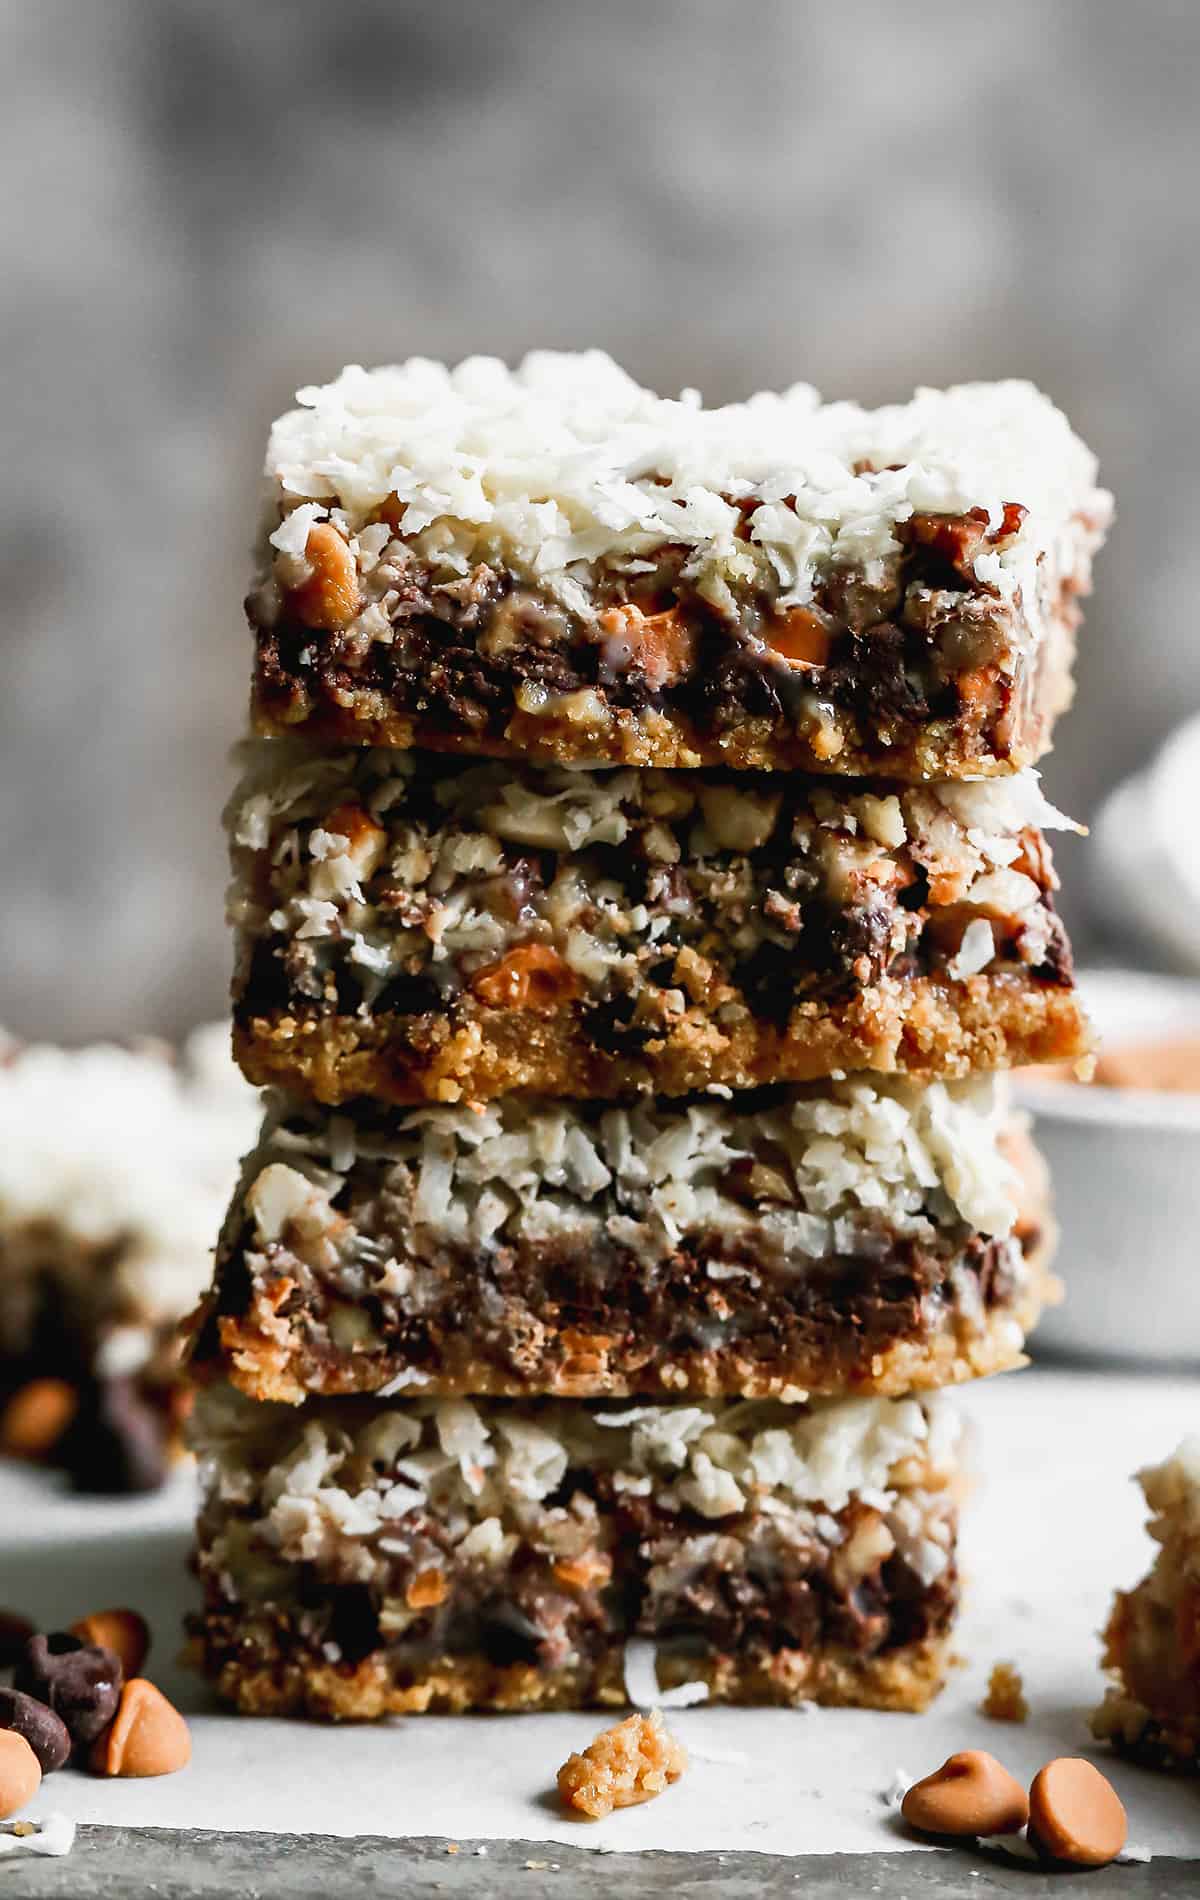 A stack of four Magic Bars, showing all the layers, ready to enjoy.